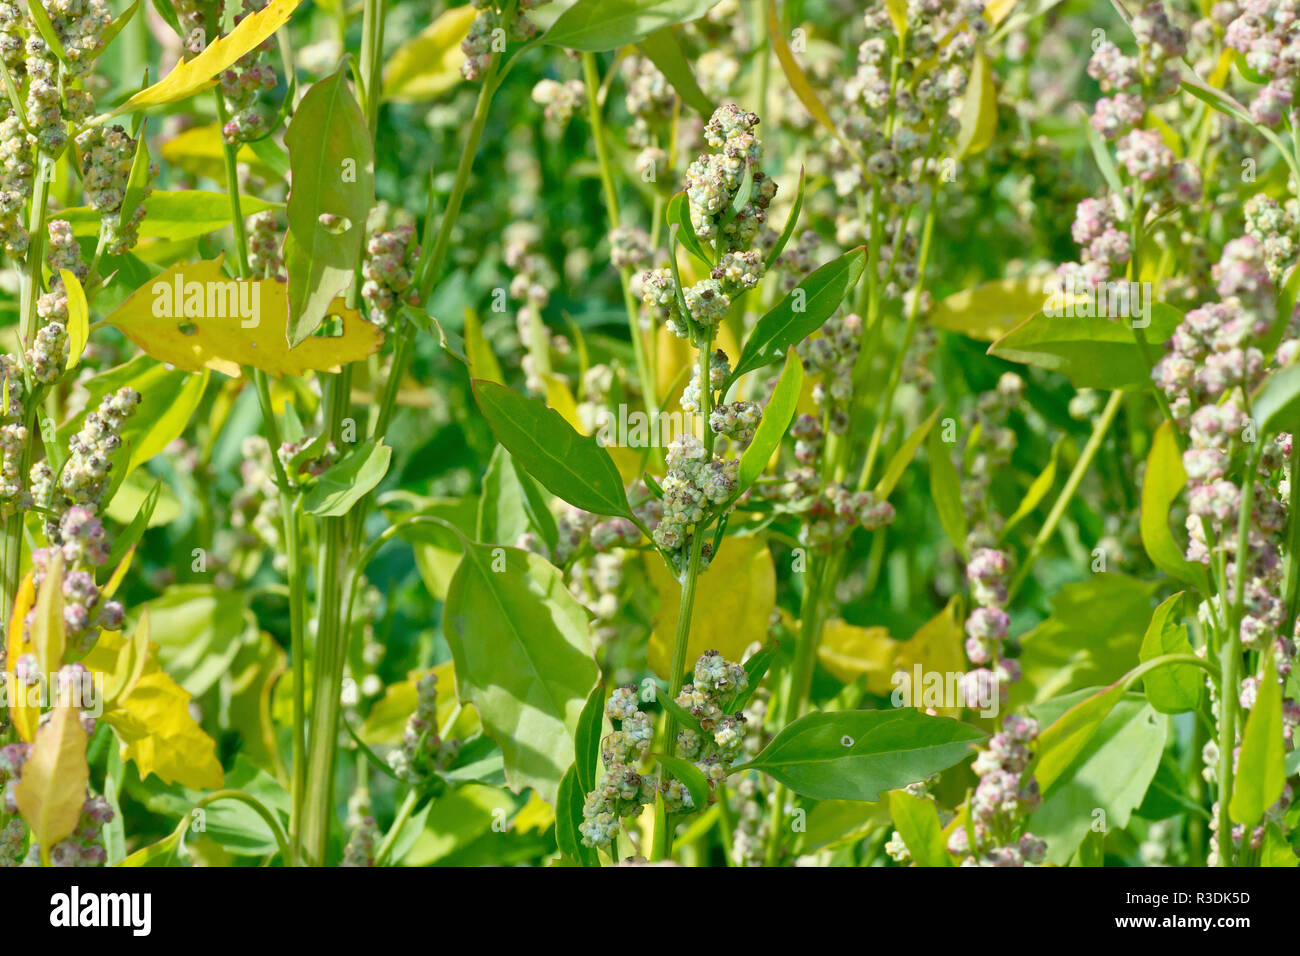 Fat-hen (chenopodium album), close up of the plant showing flower heads and leaves. Stock Photo